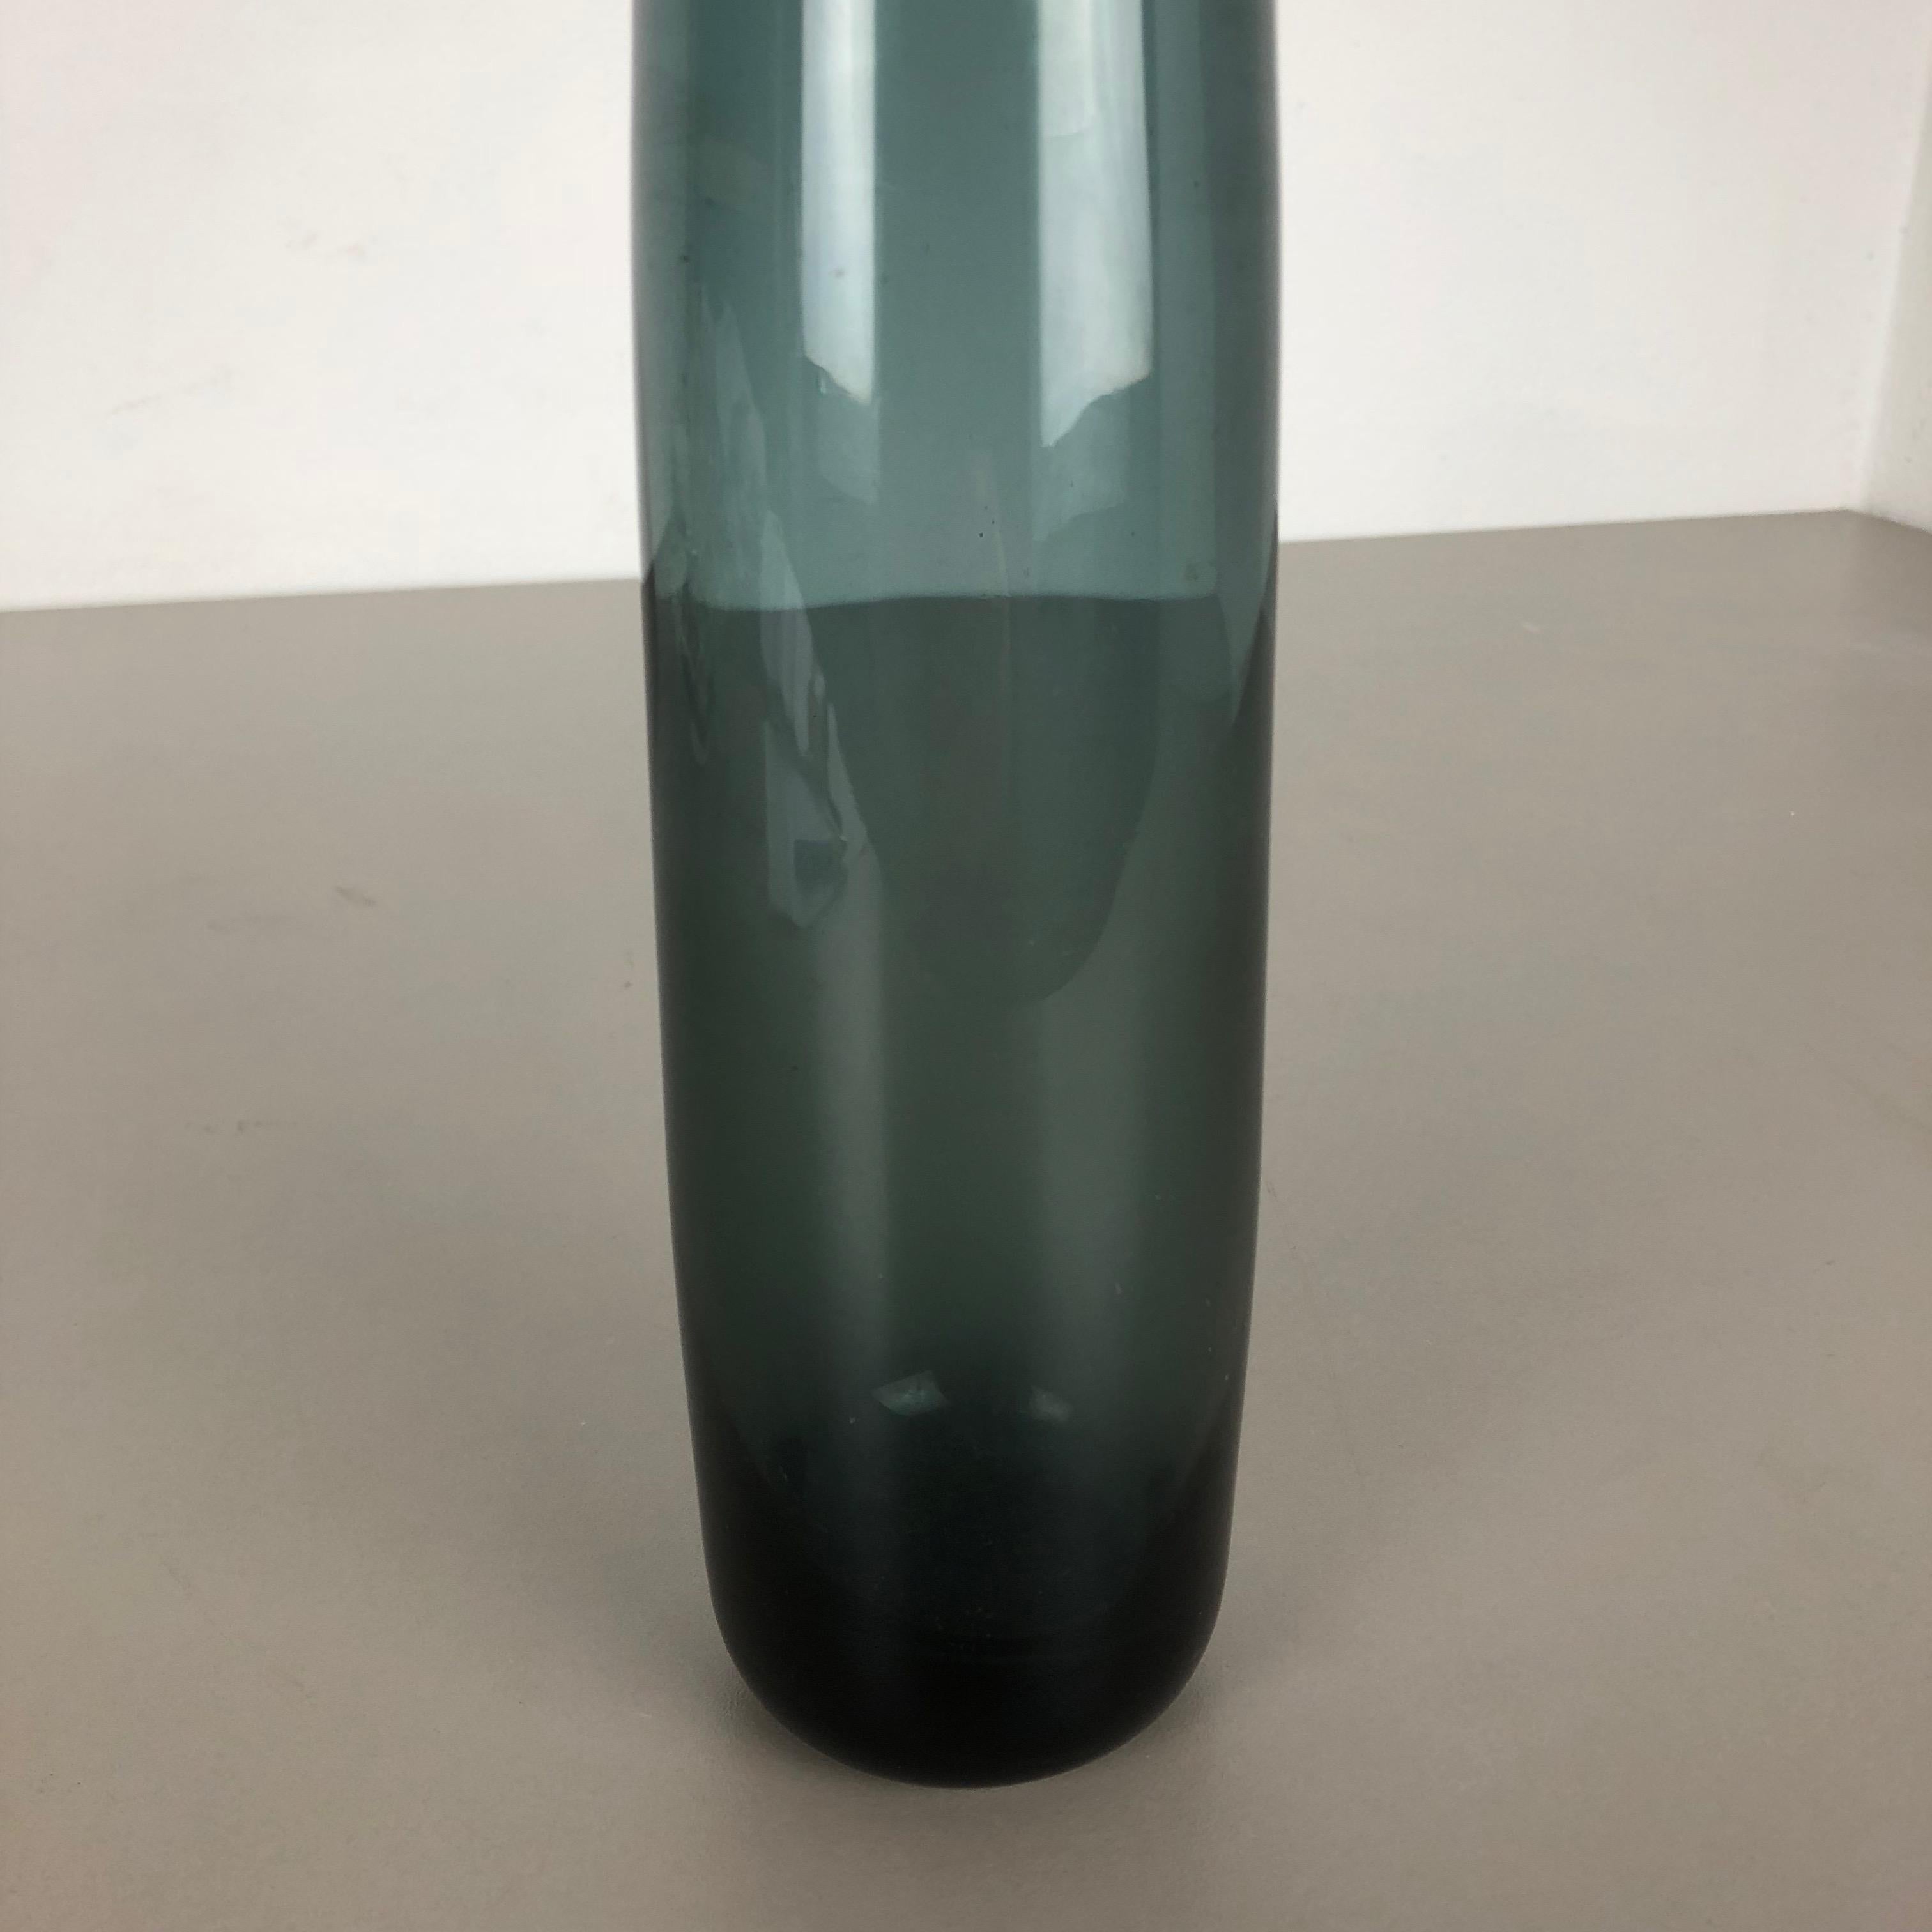 Large Vintage 1960s Turmalin Vase by Wilhelm Wagenfeld for WMF, Germany Bauhaus For Sale 4